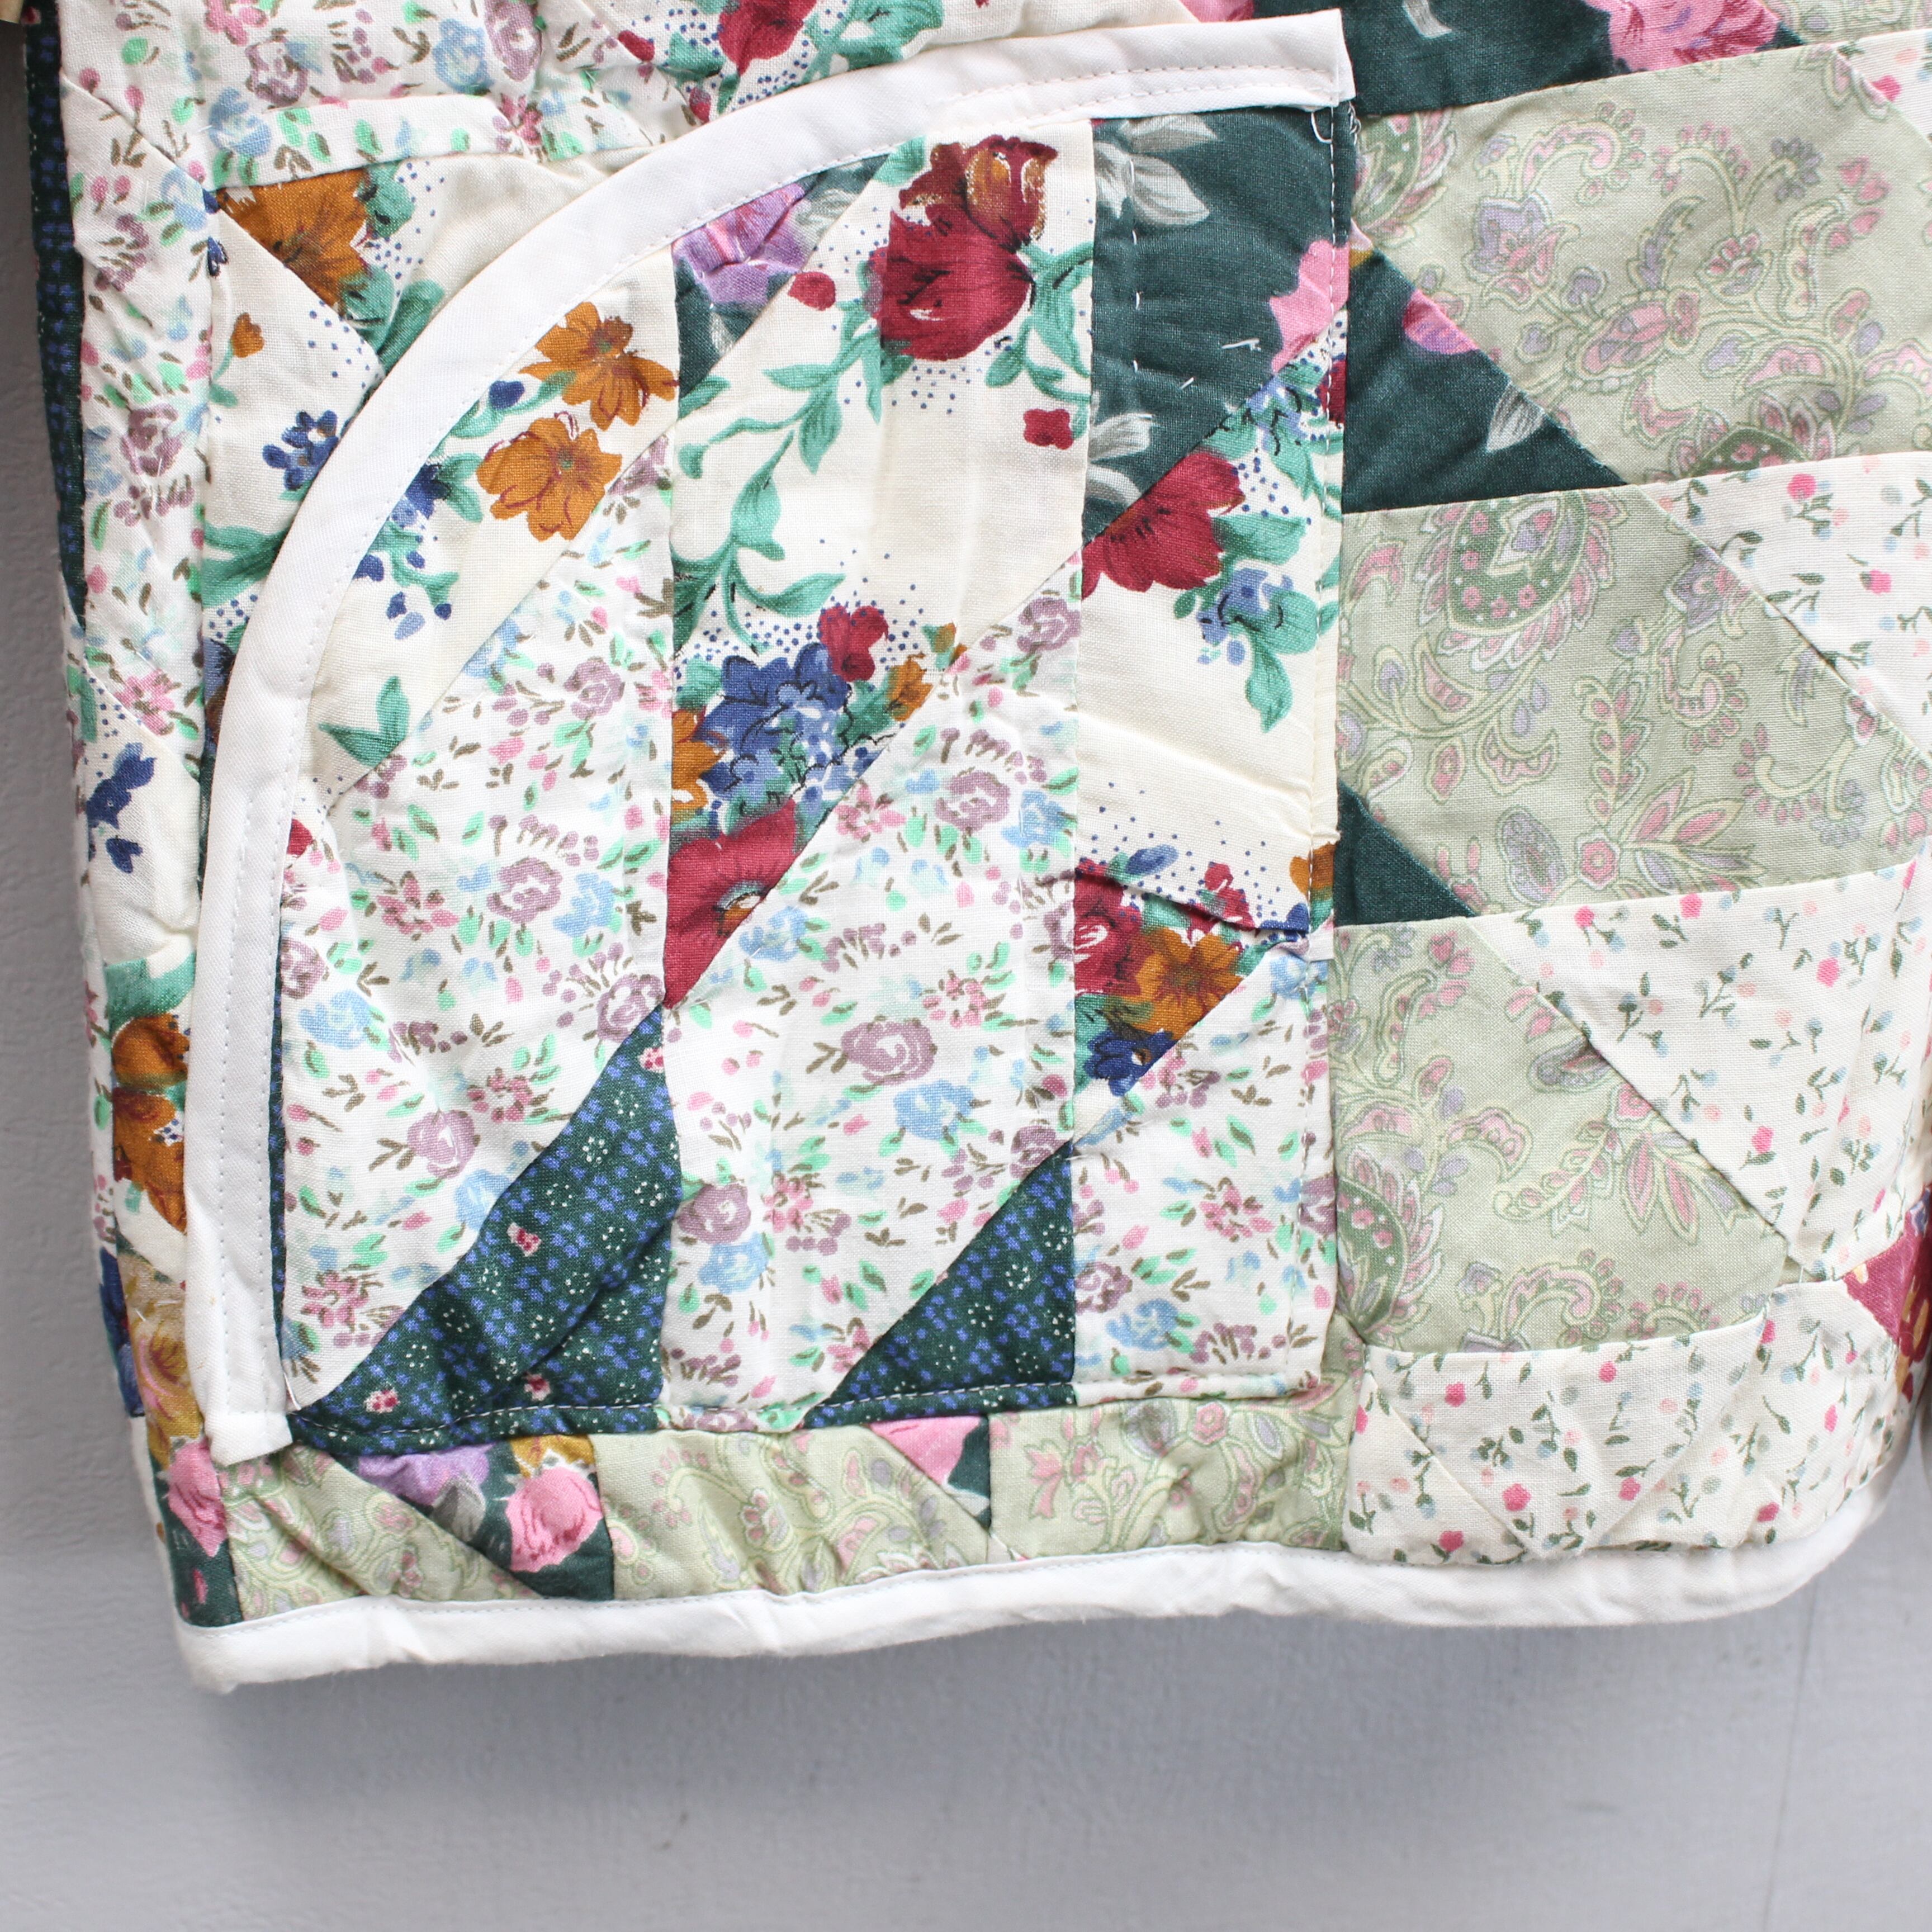 USA VINTAGE FLOWER PATTERNED QUILTING PATCHWORK JACKET/アメリカ